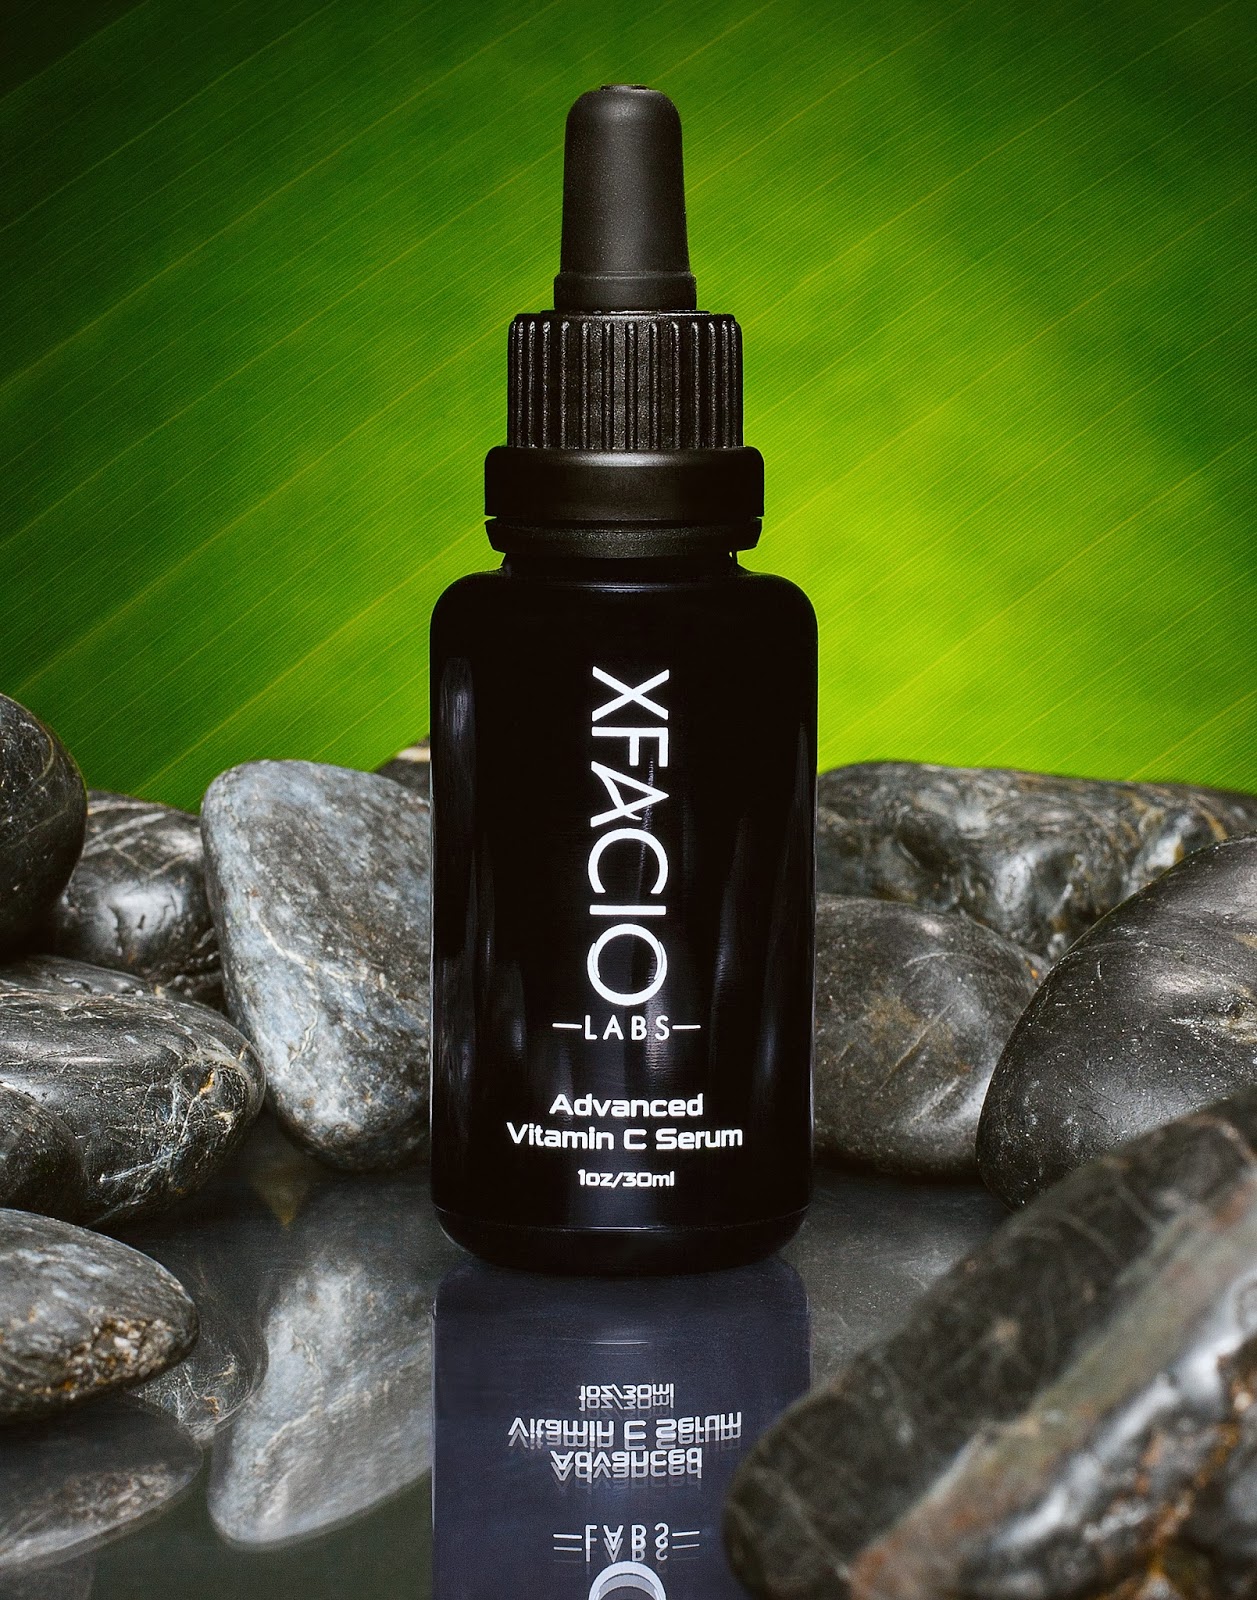 http://www.amazon.com/Xfacio-Labs-Concentrated-Benefits-Helps-Protection/dp/B00CHFRIDS/ie=UTF8?m=A1FNLPJRJA8L33&keywords=vitamin+c+serums&tag=xfacioantiaging2-20